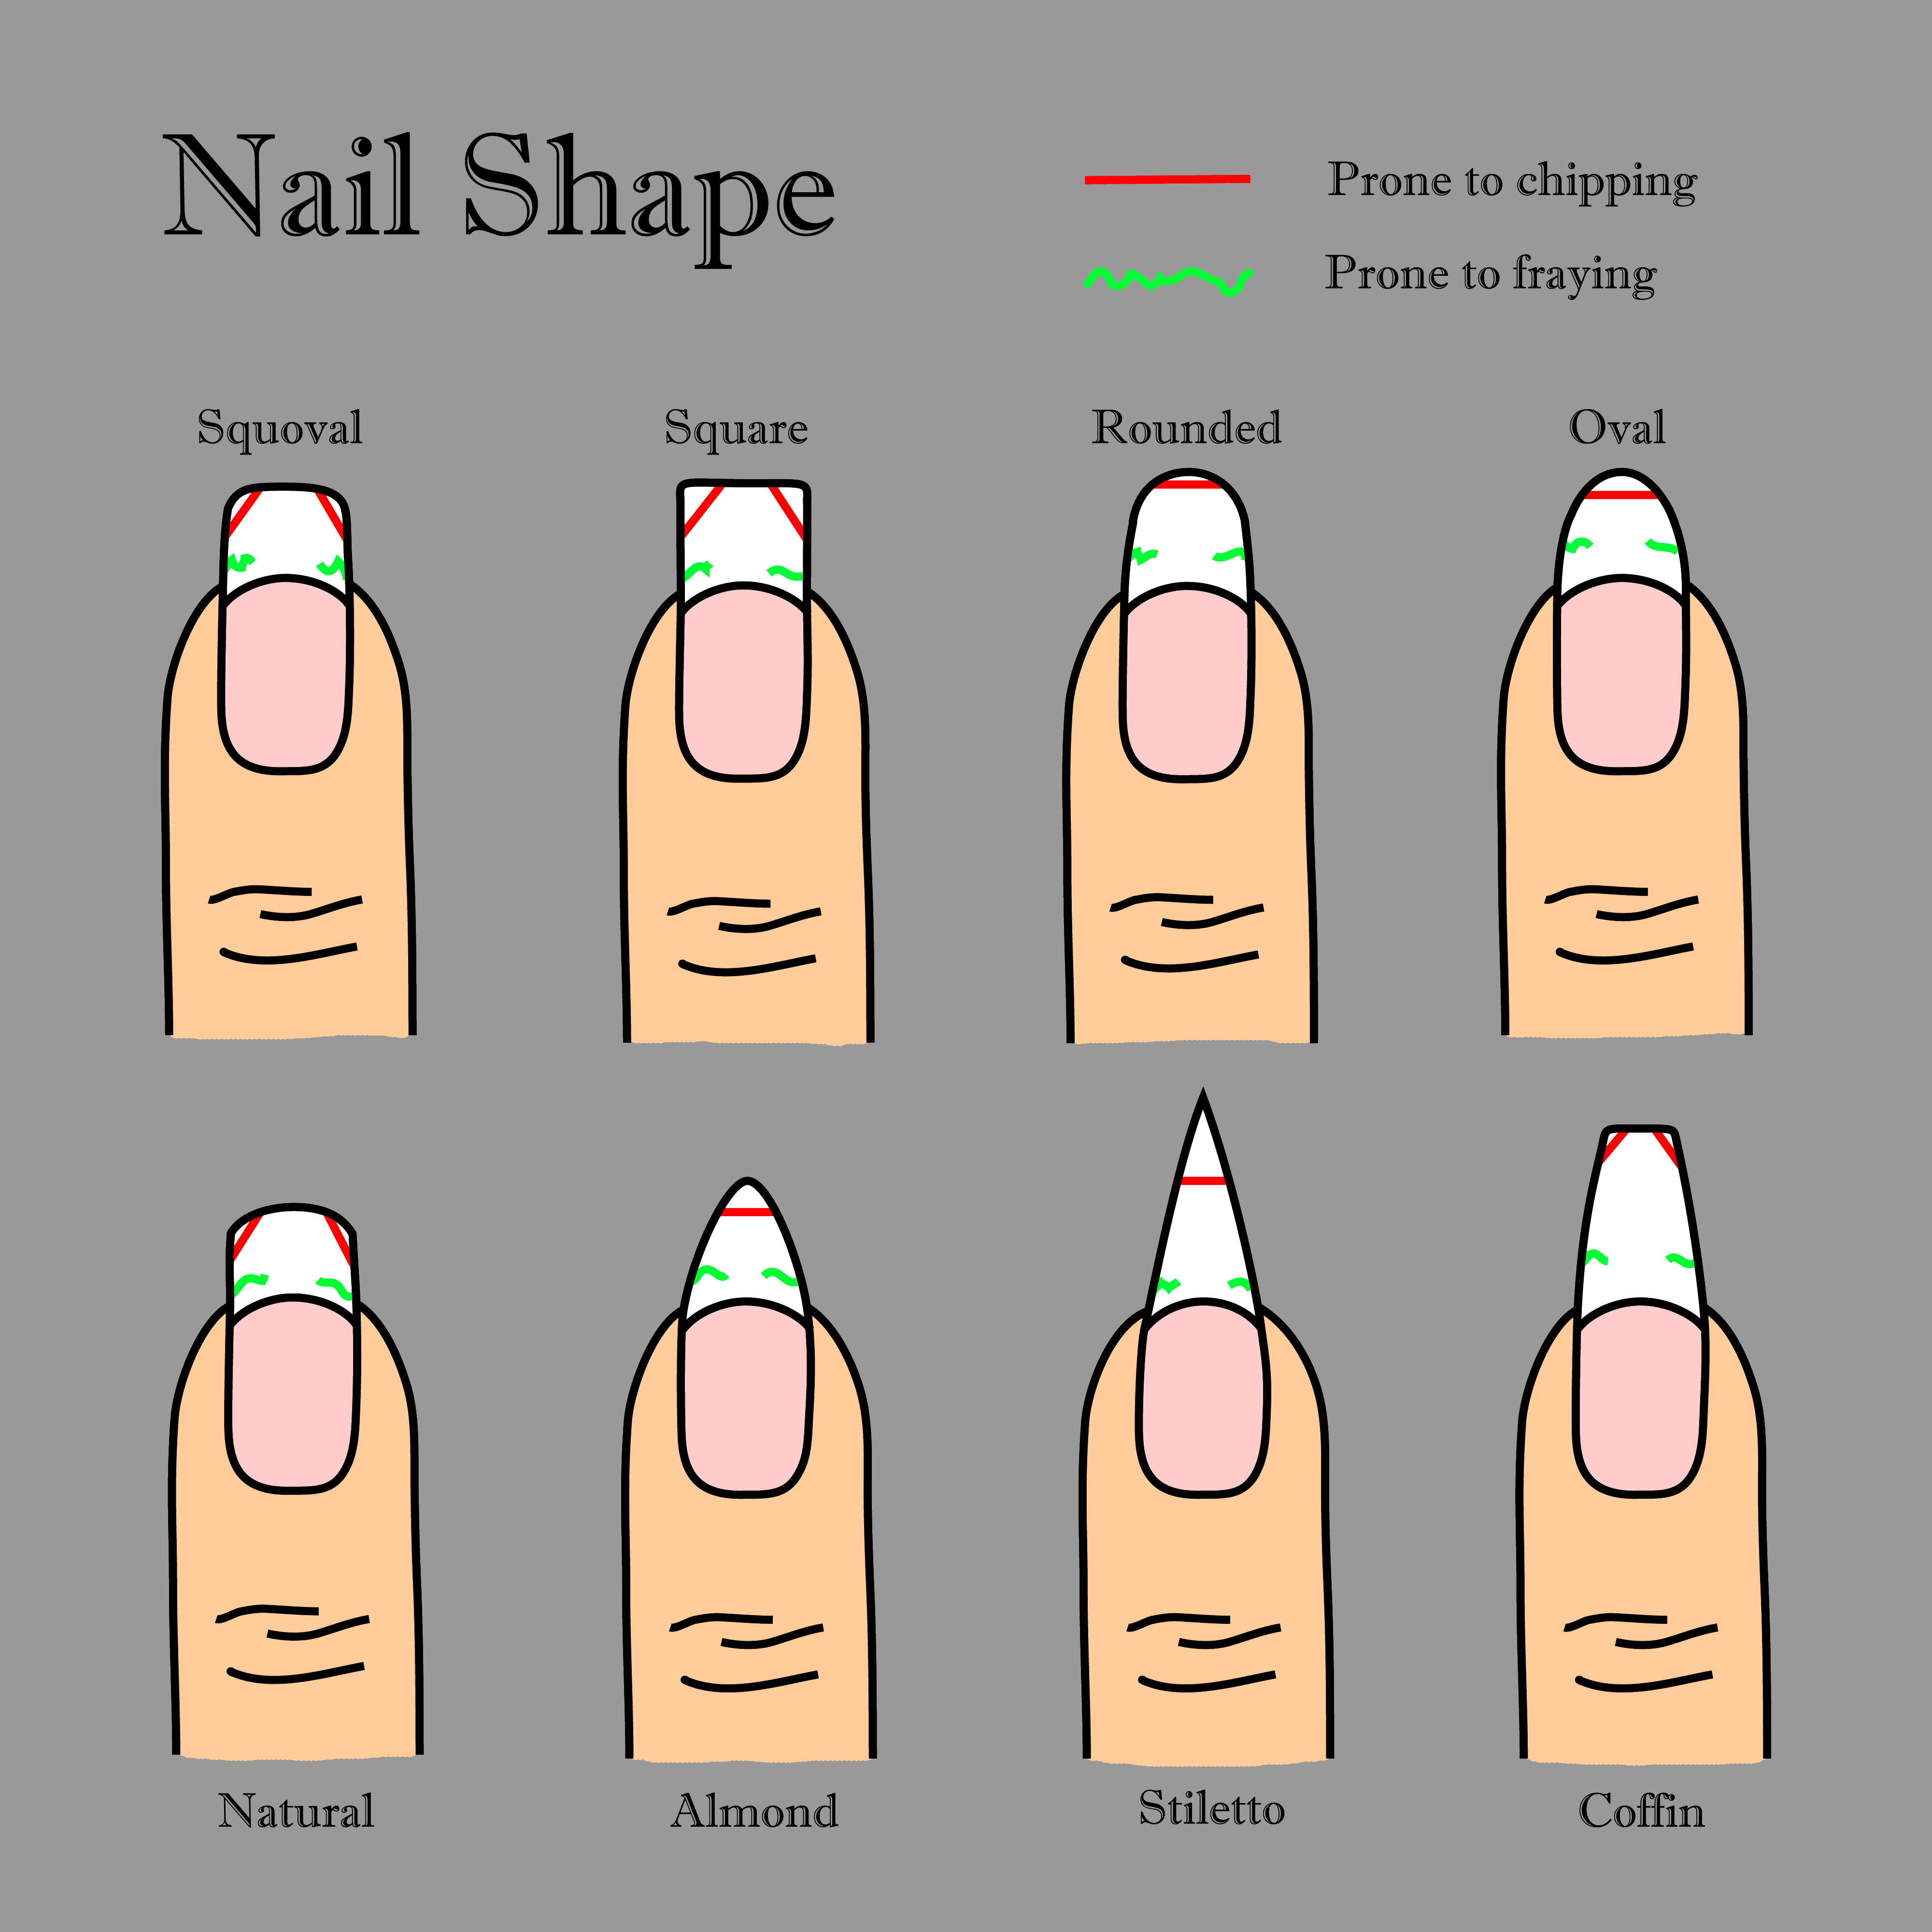 Nail Shapes Setfemale Manicure Different Nail Forms Salon Nails Type Trends  Stock Illustration - Download Image Now - iStock